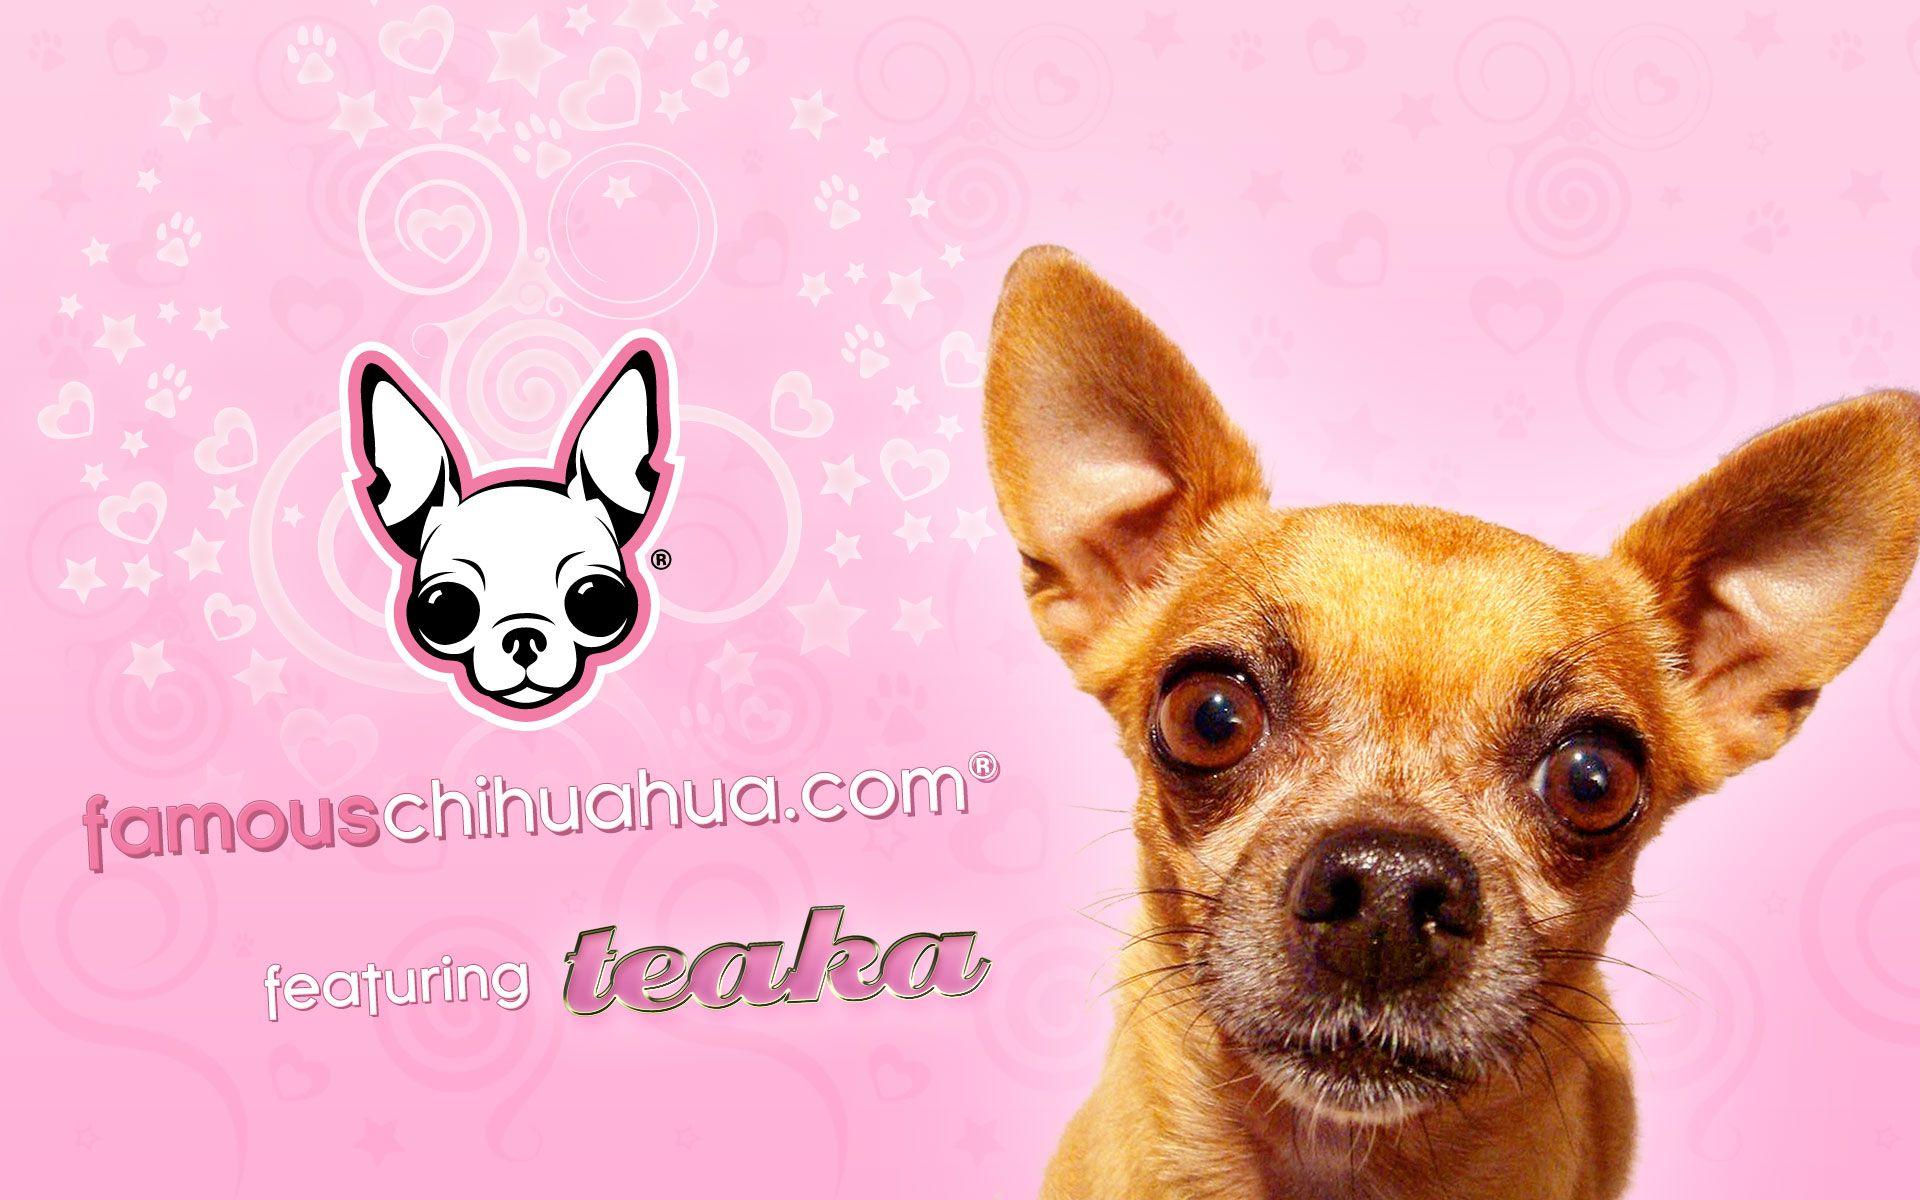 Download free famous chihuahua wallpapers